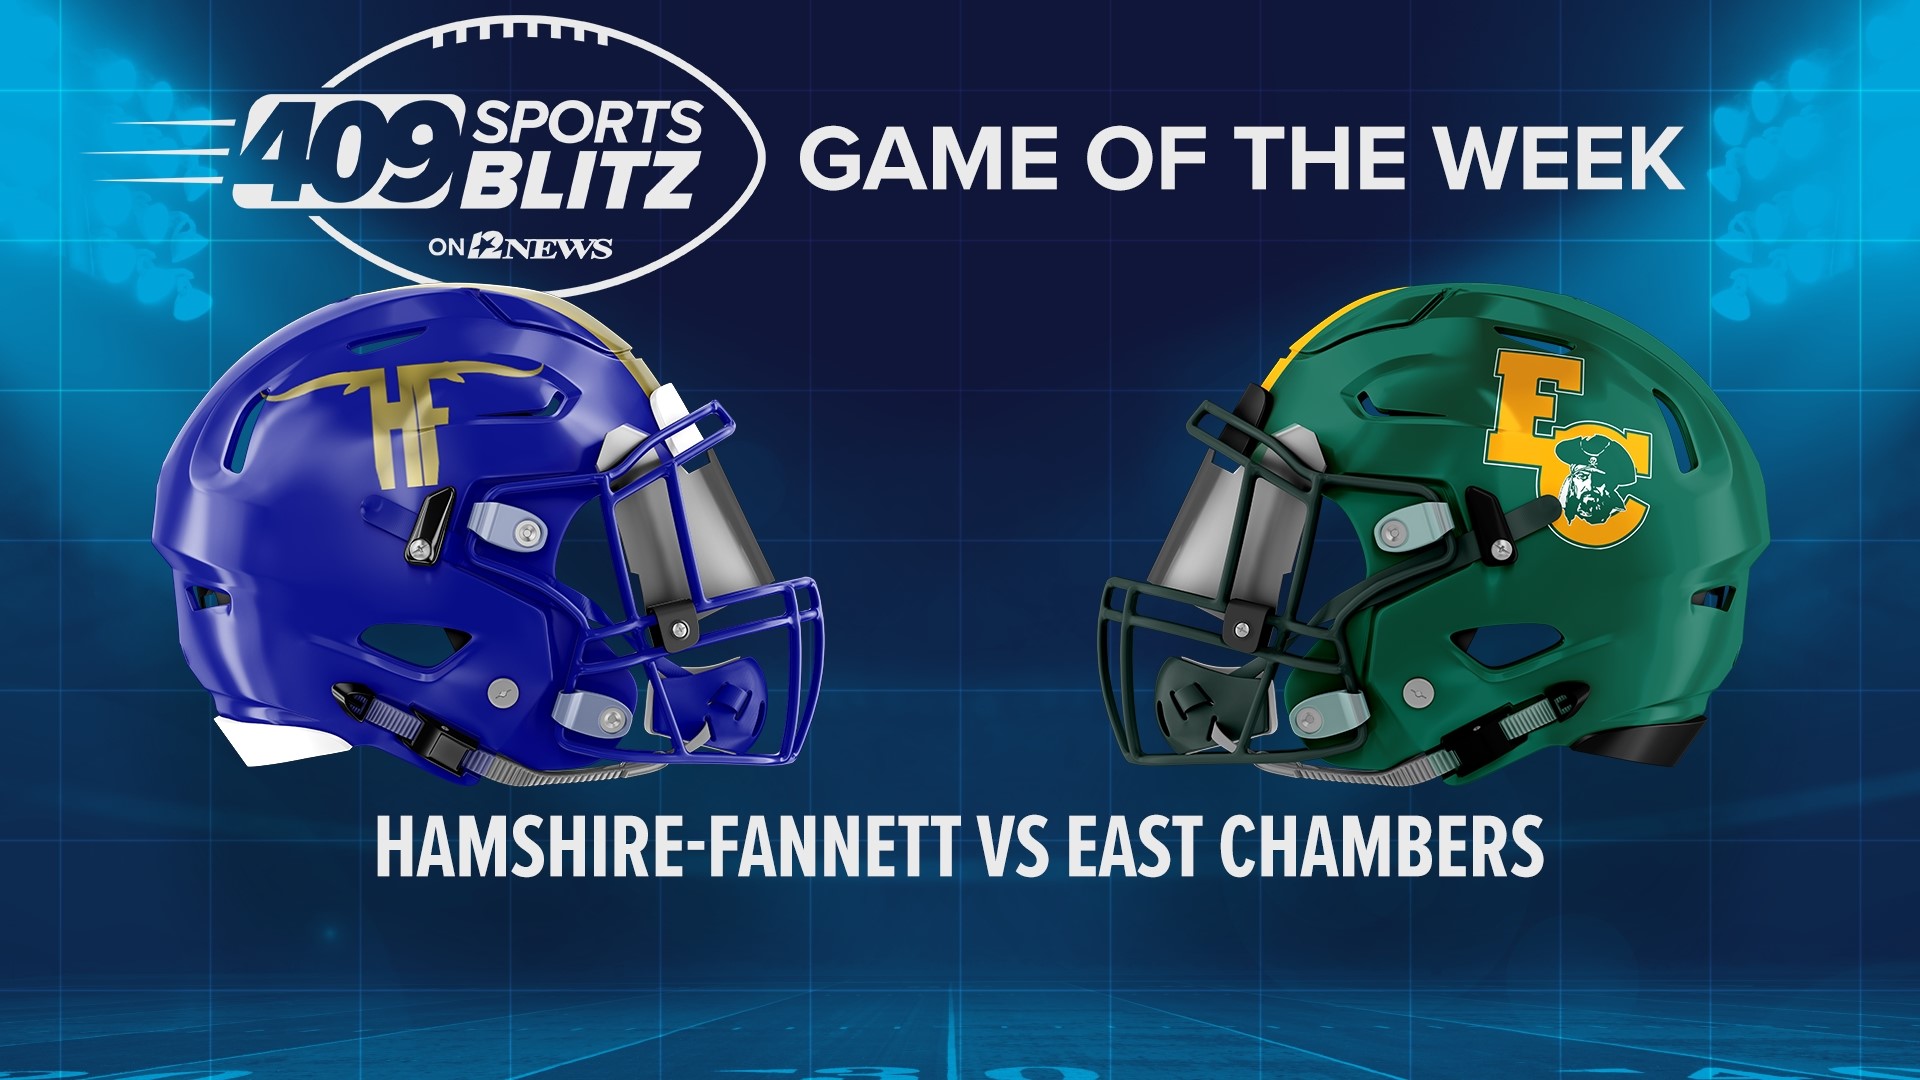 Hamshire-Fannett and East Chambers will renew their rivalry Friday night in the 409Sports Blitz Game of The Week